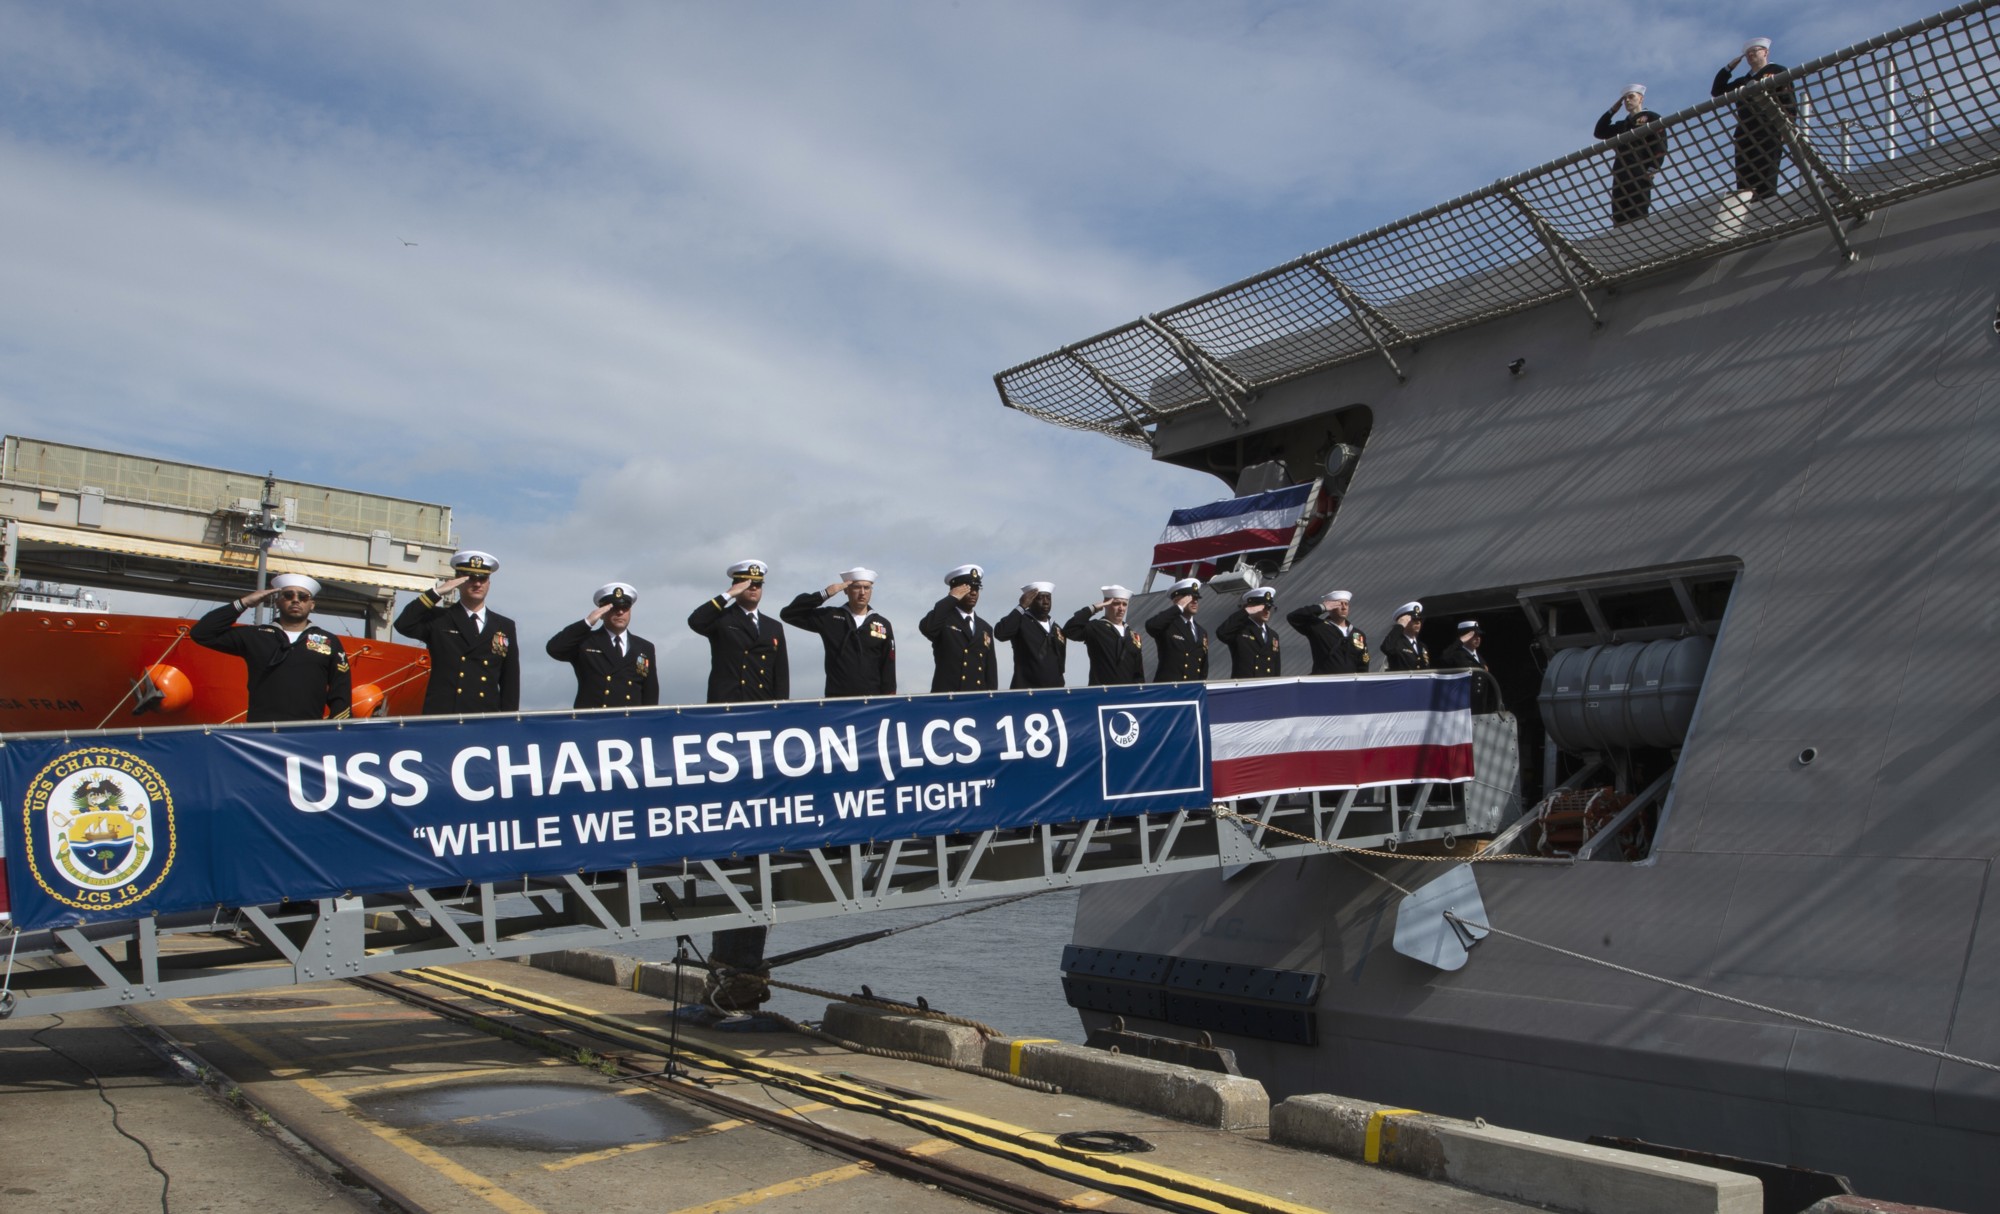 lcs-18 uss charleston littoral combat ship independence class us navy 09 commissioning